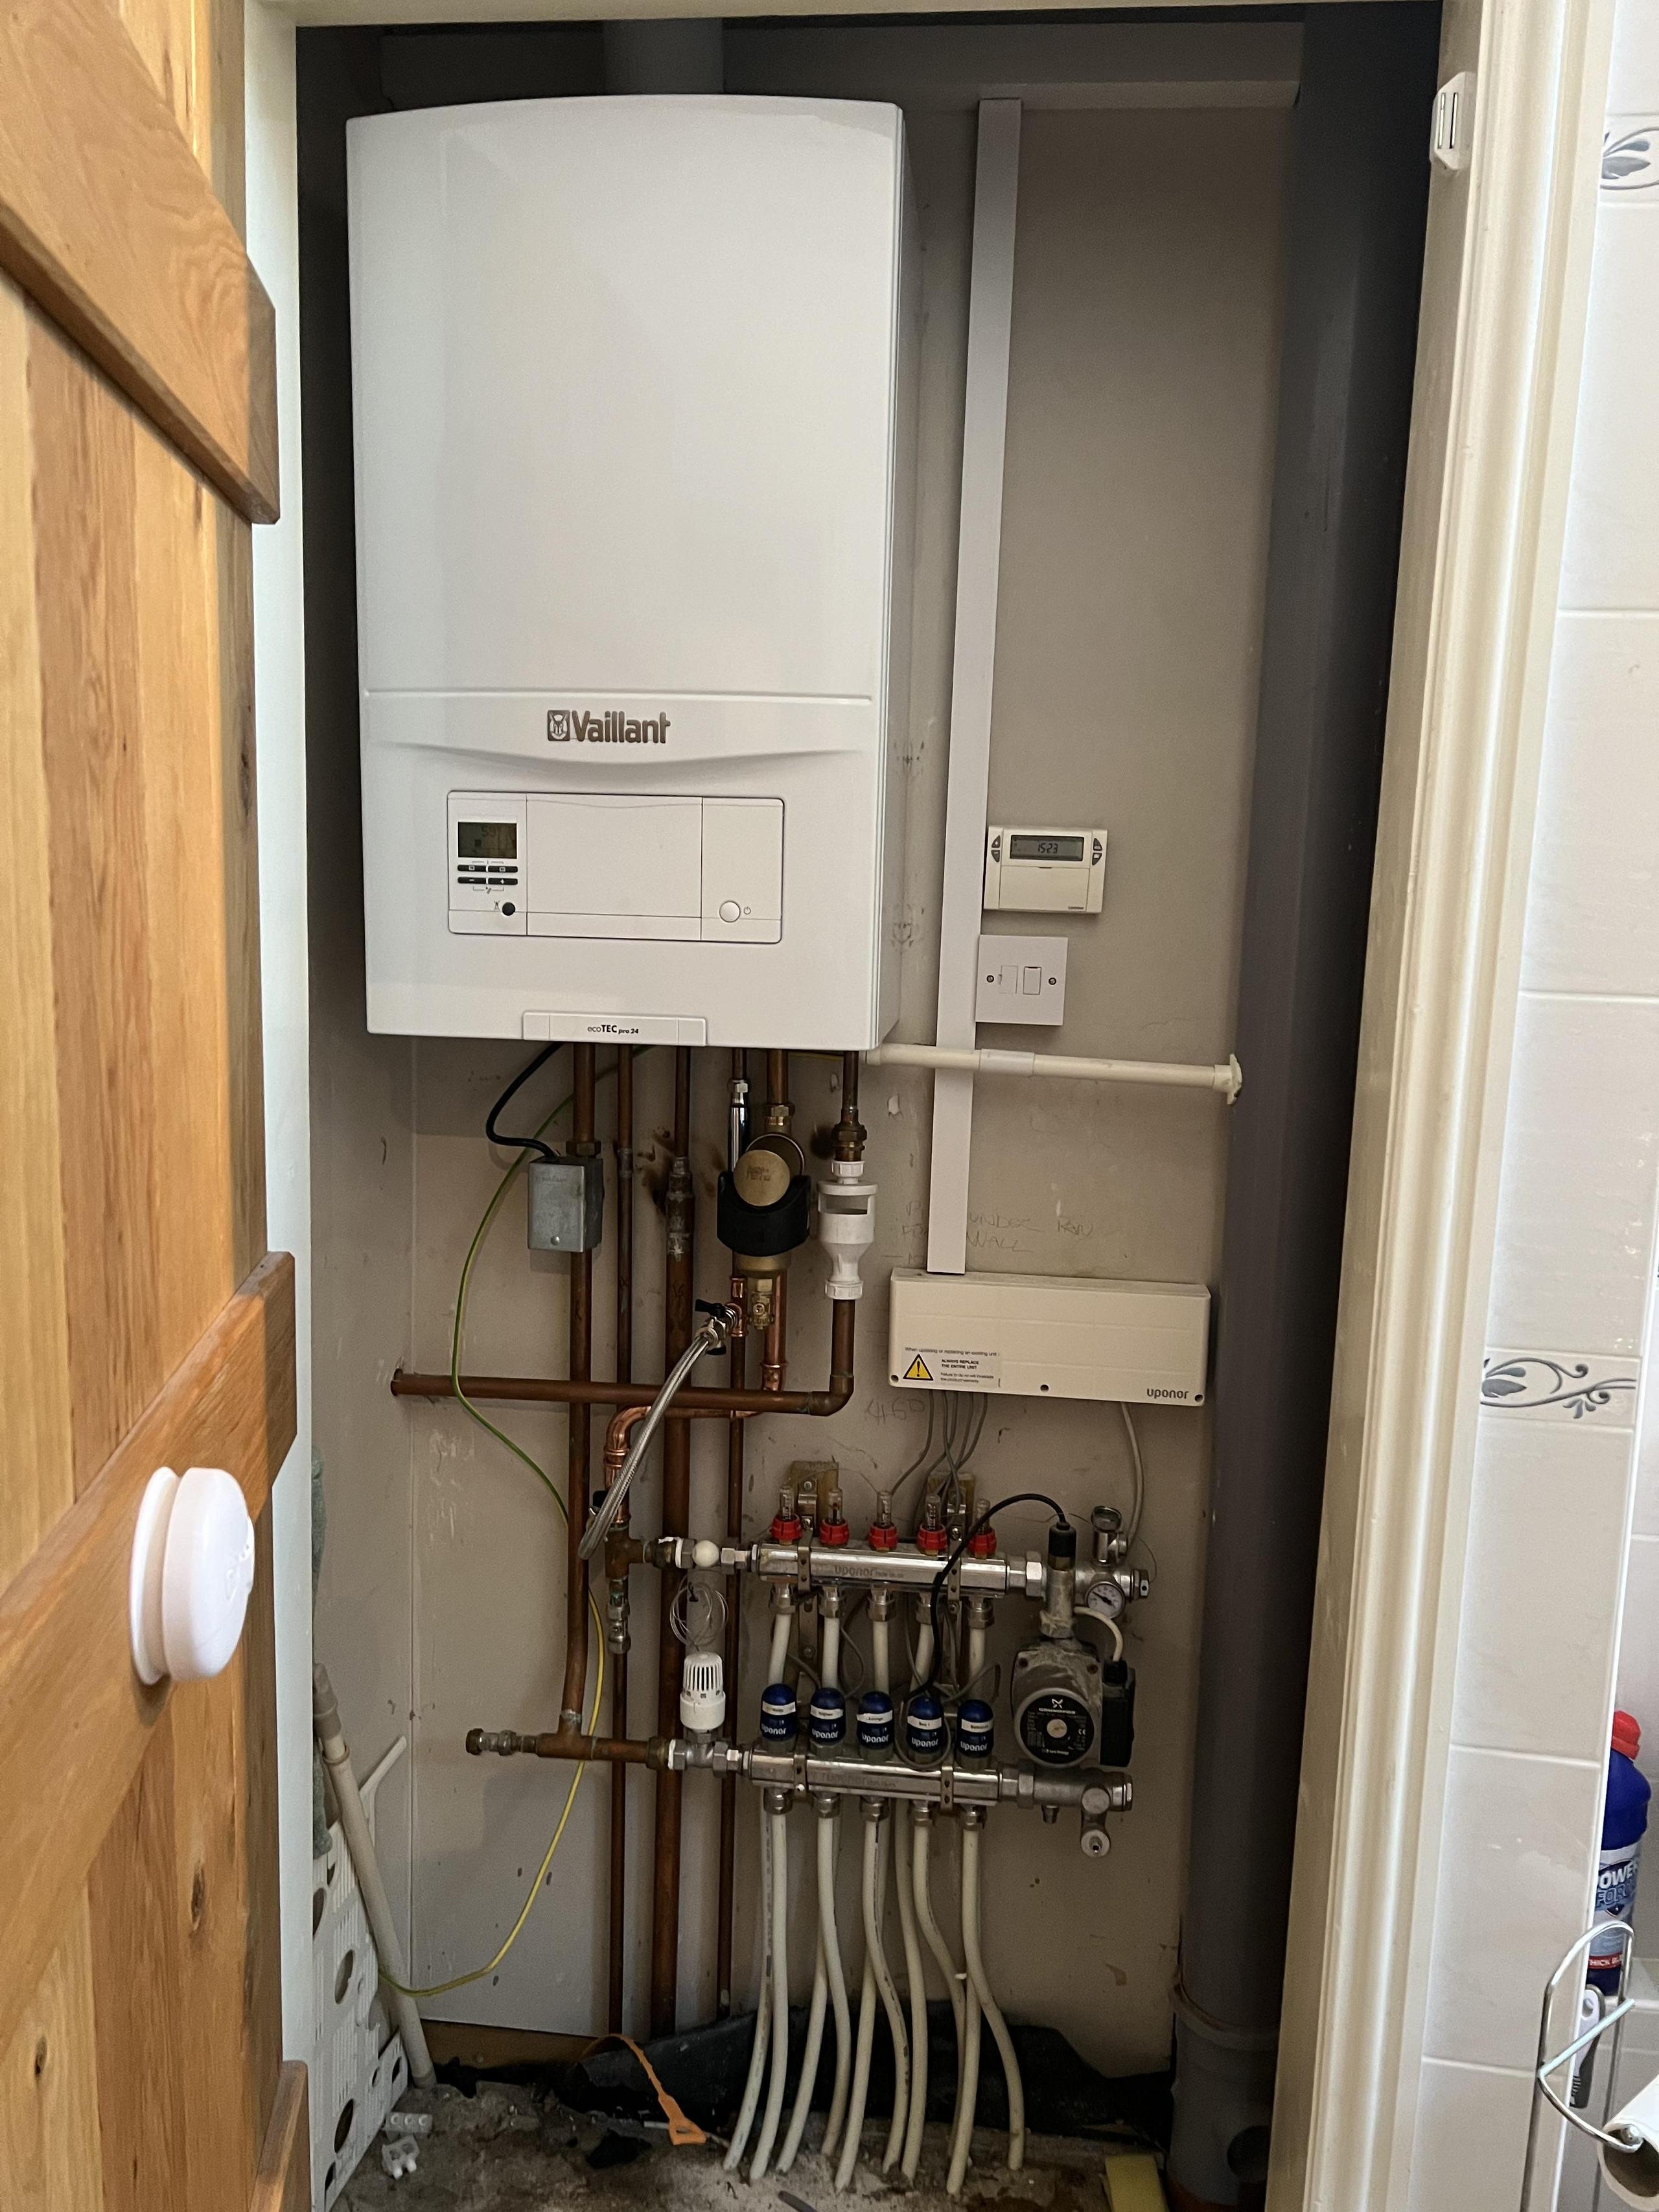 Vaillant Boilers Installed By Daztec